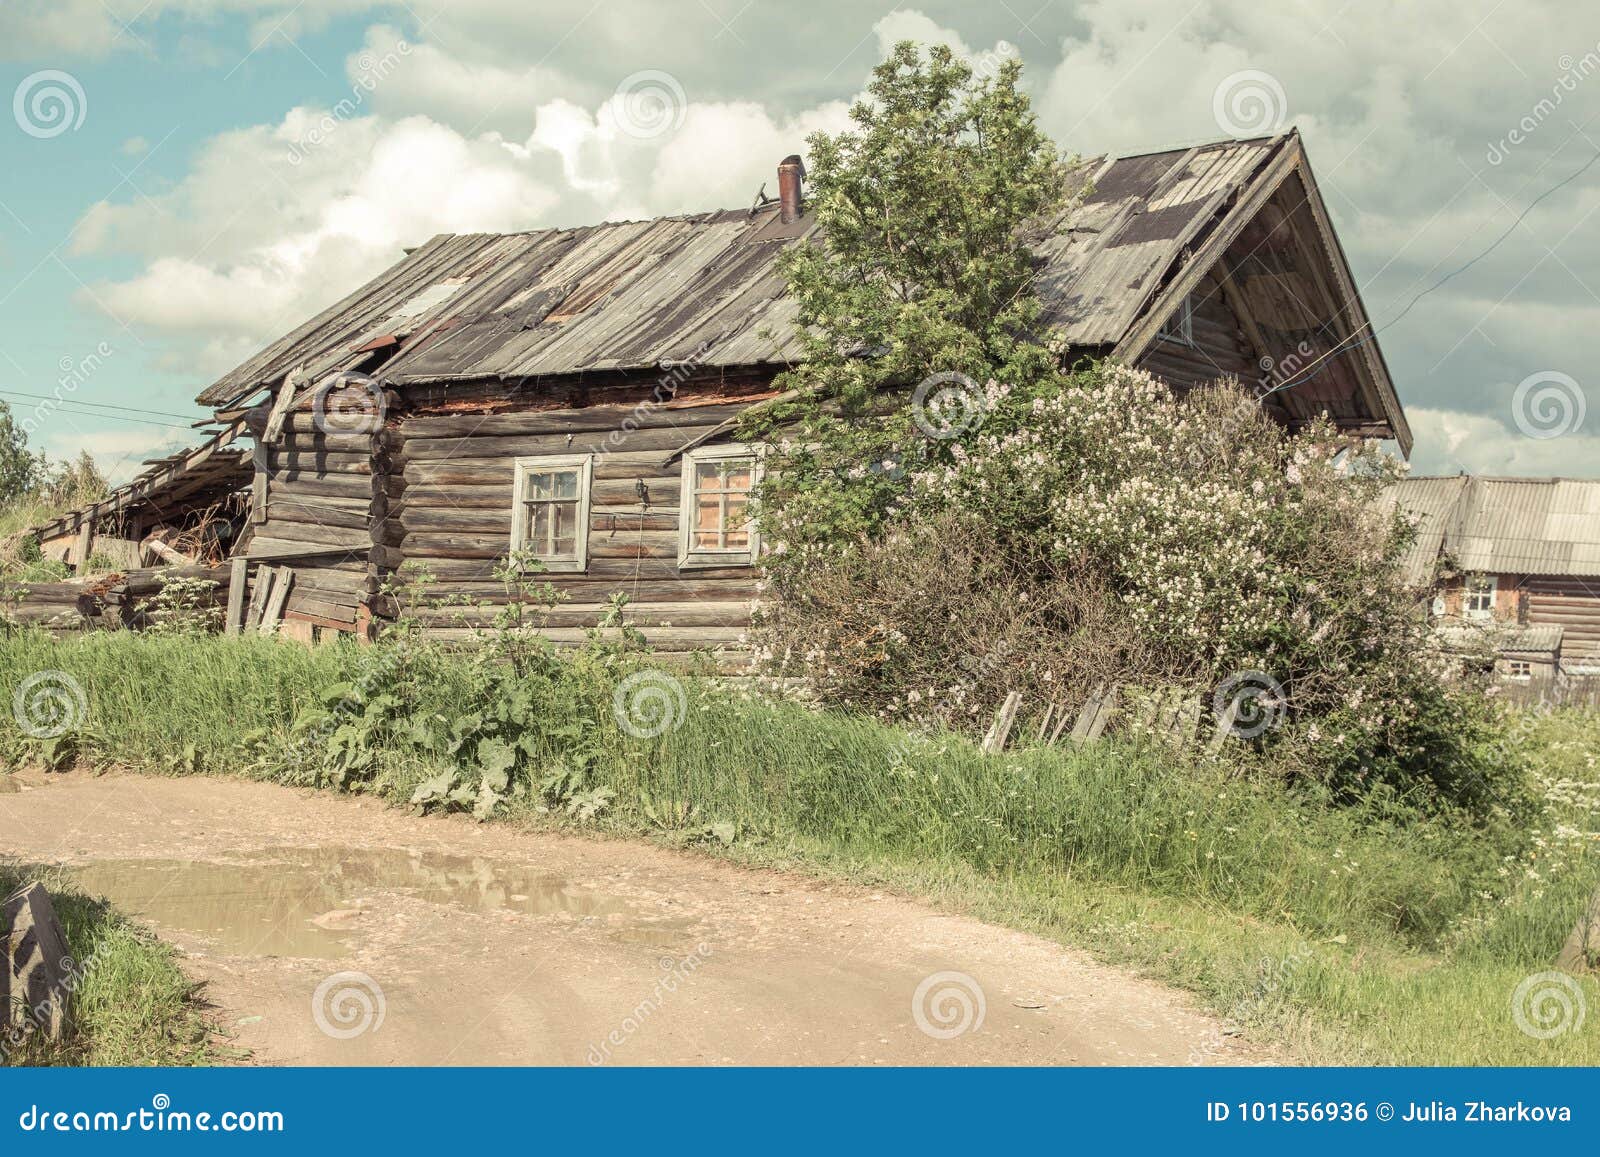 north russian village isady. summer day, emca river, old cottages on the shore, old wooden bridge. abandoned building.